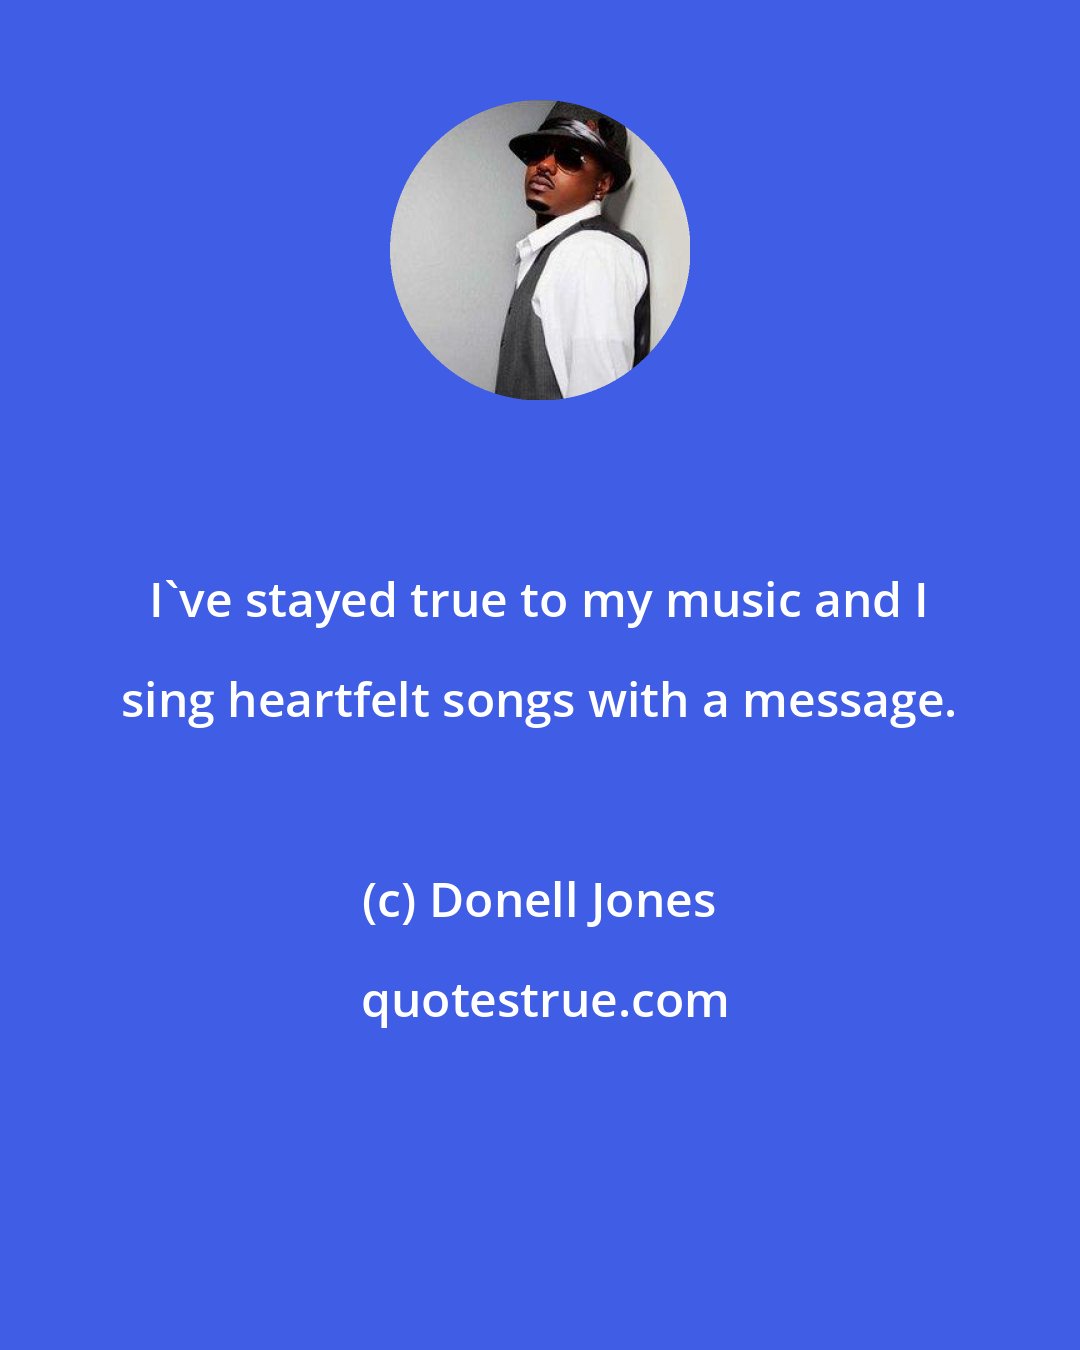 Donell Jones: I've stayed true to my music and I sing heartfelt songs with a message.